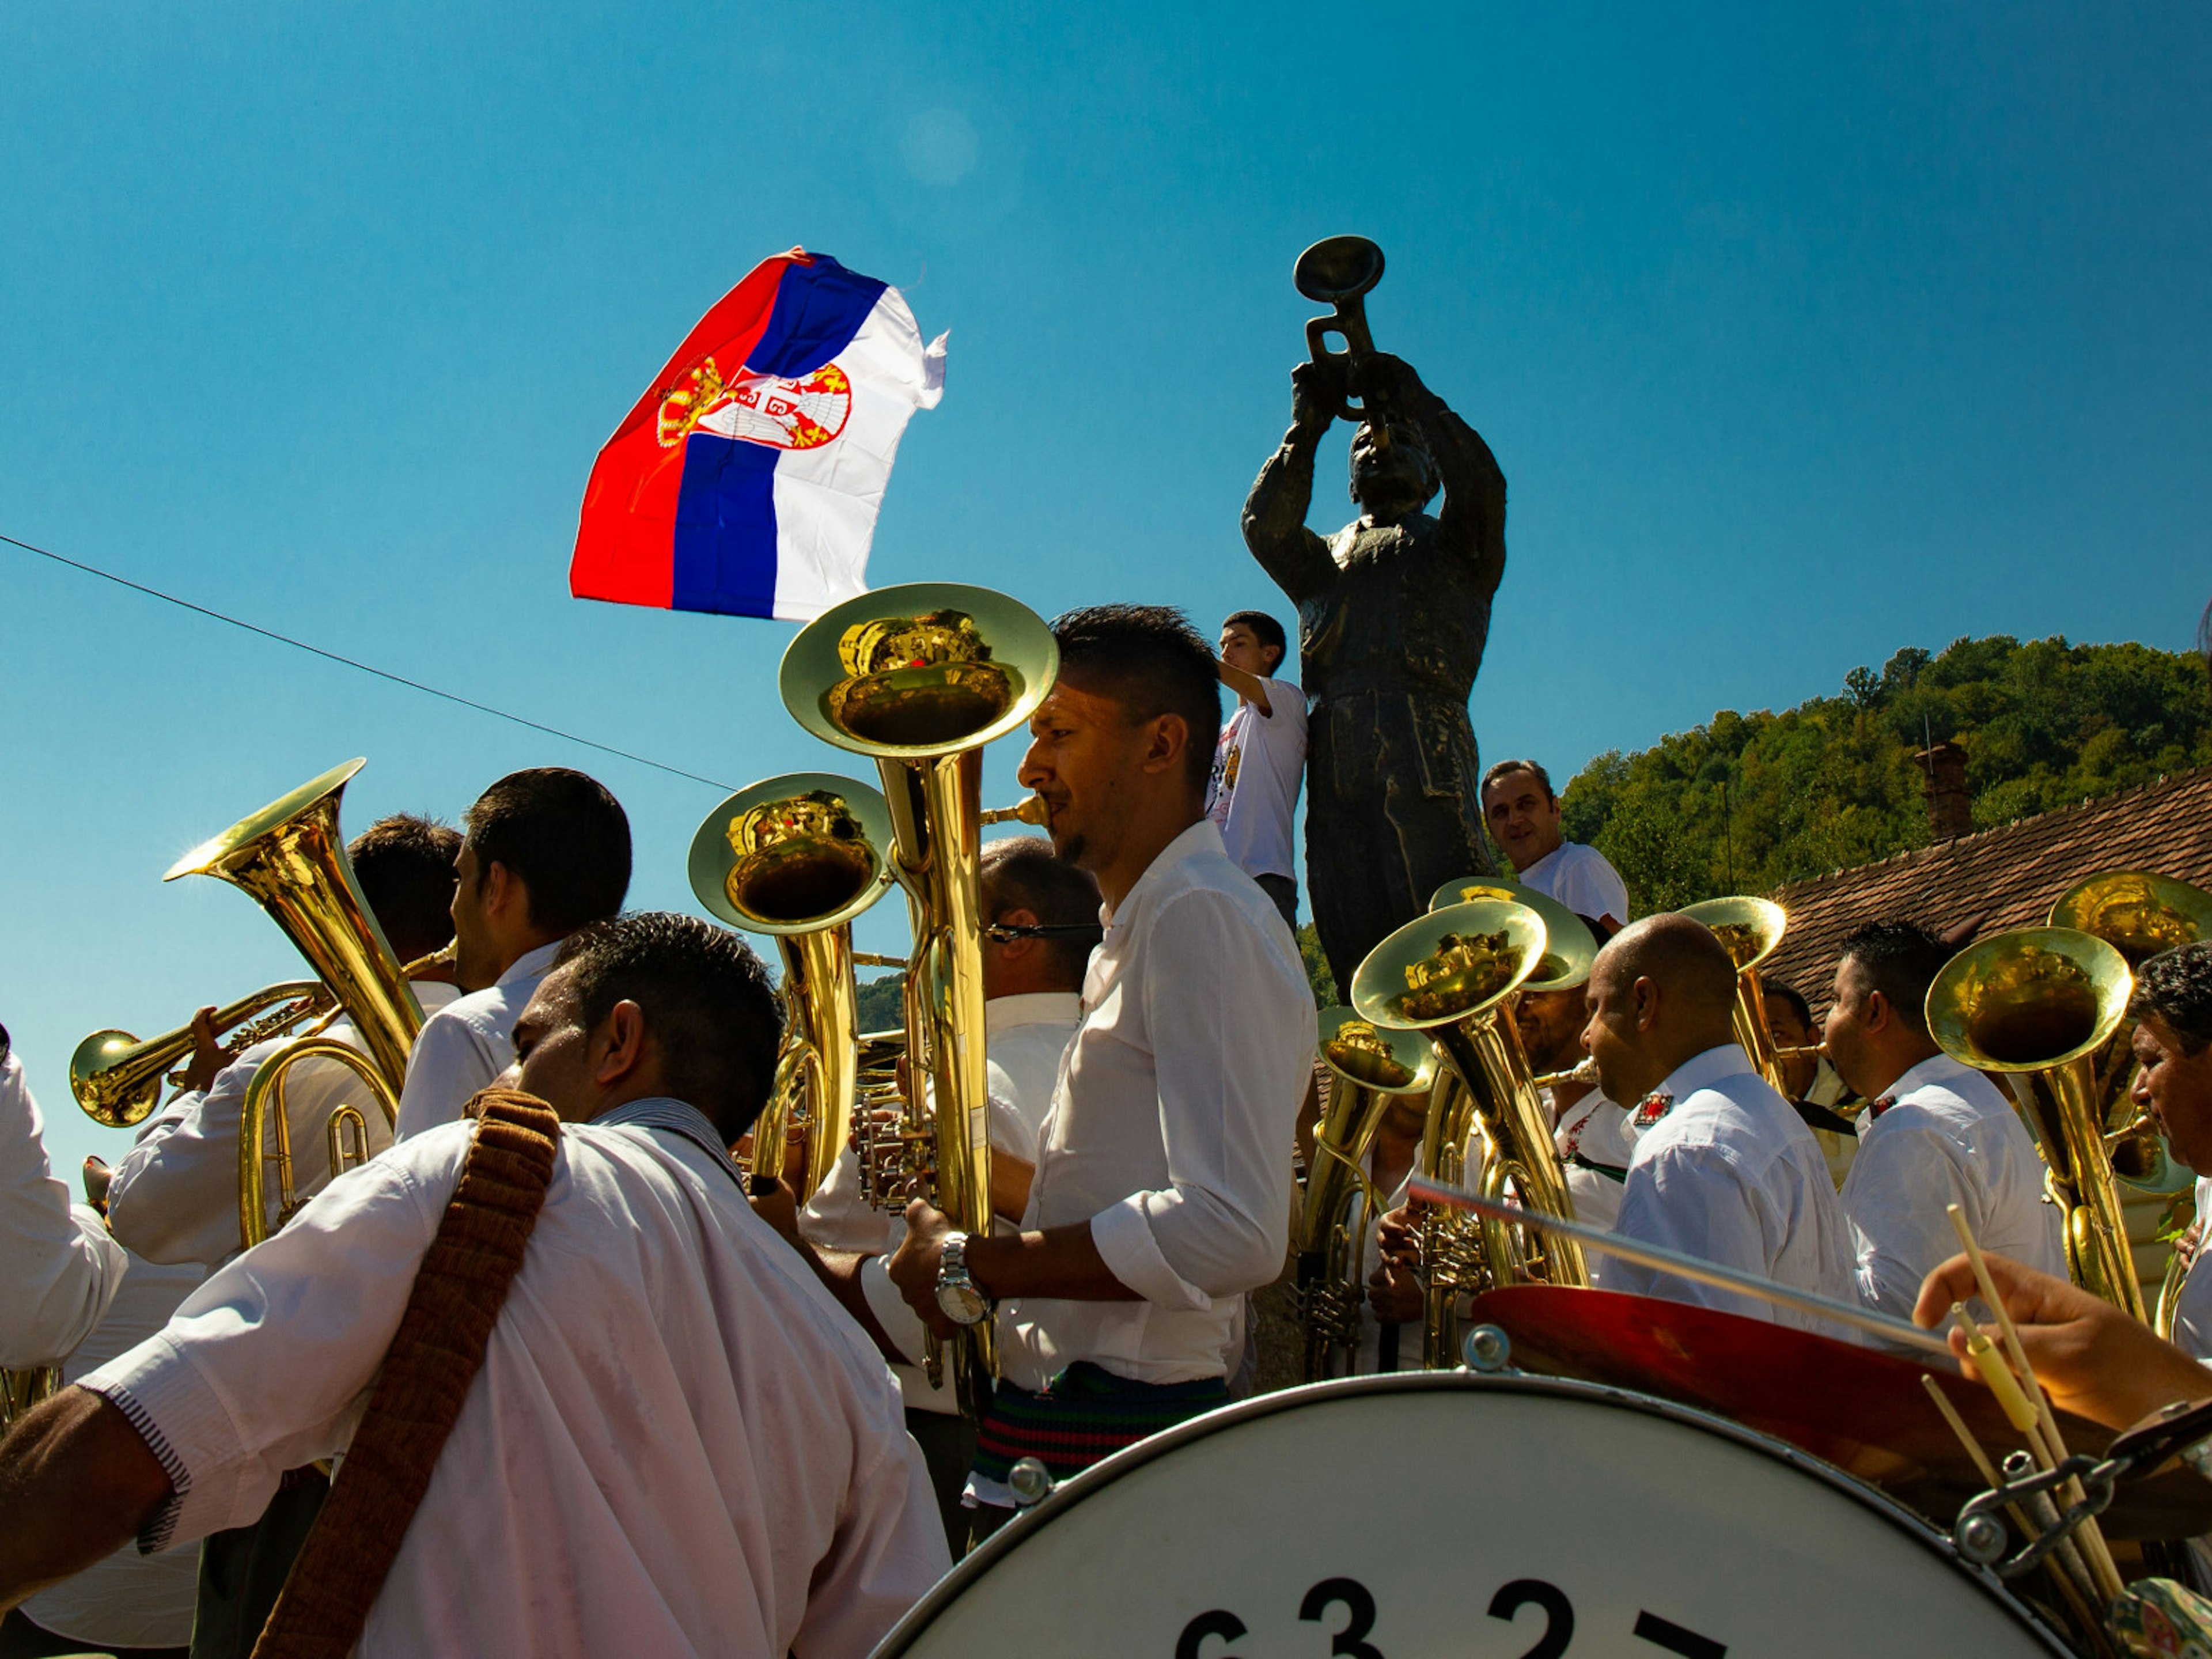 Roma brass bands parade through Guča during the 2017 Trumpet Festival © Aleksandar Donev / Lonely Planet